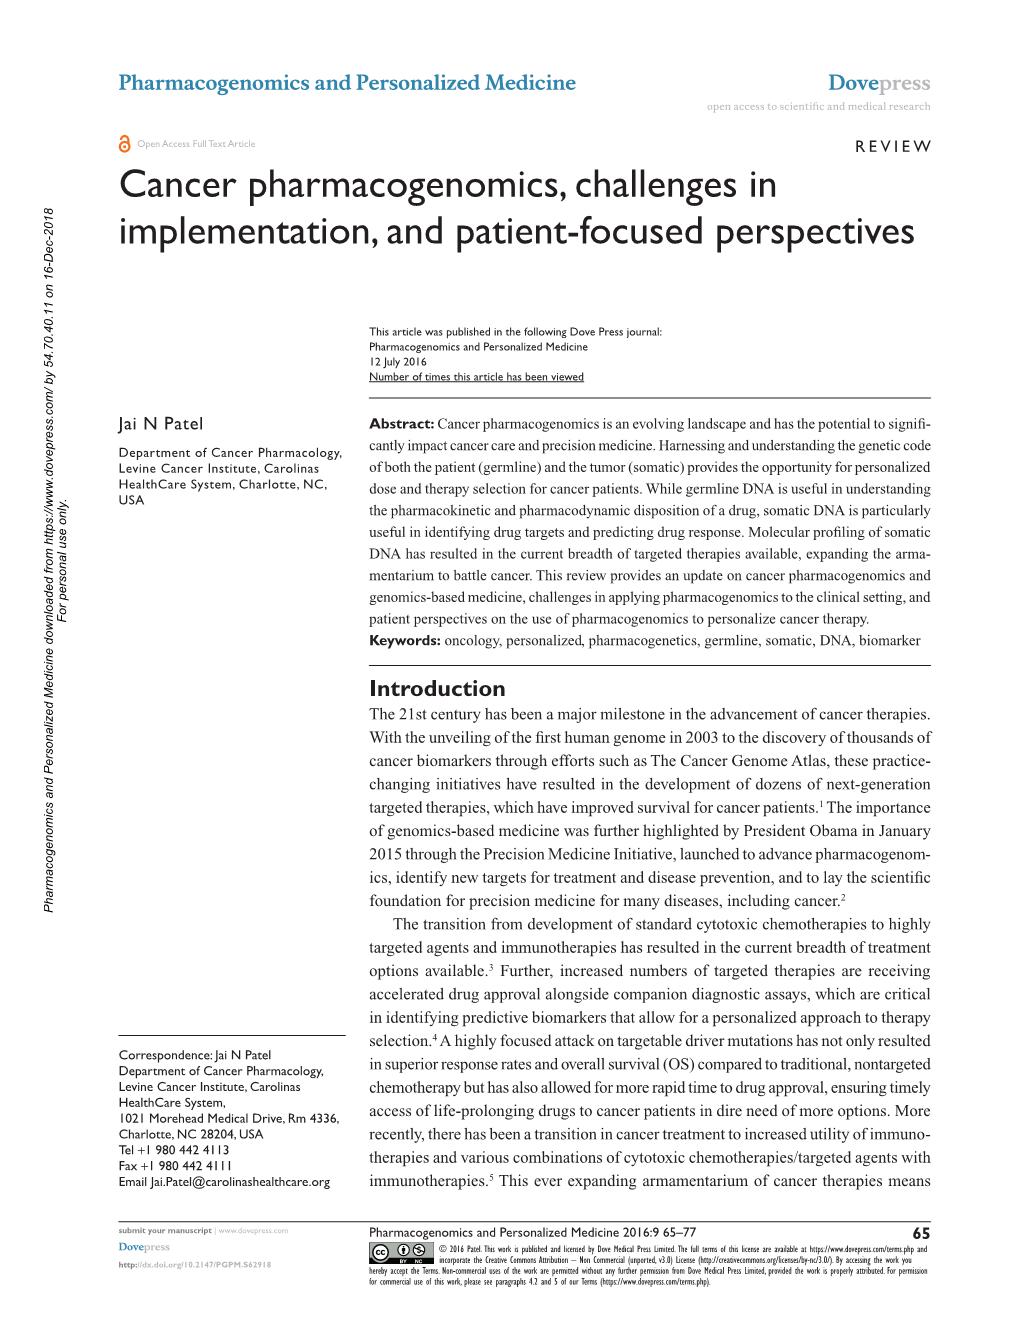 Cancer Pharmacogenomics, Challenges in Implementation, and Patient-Focused Perspectives